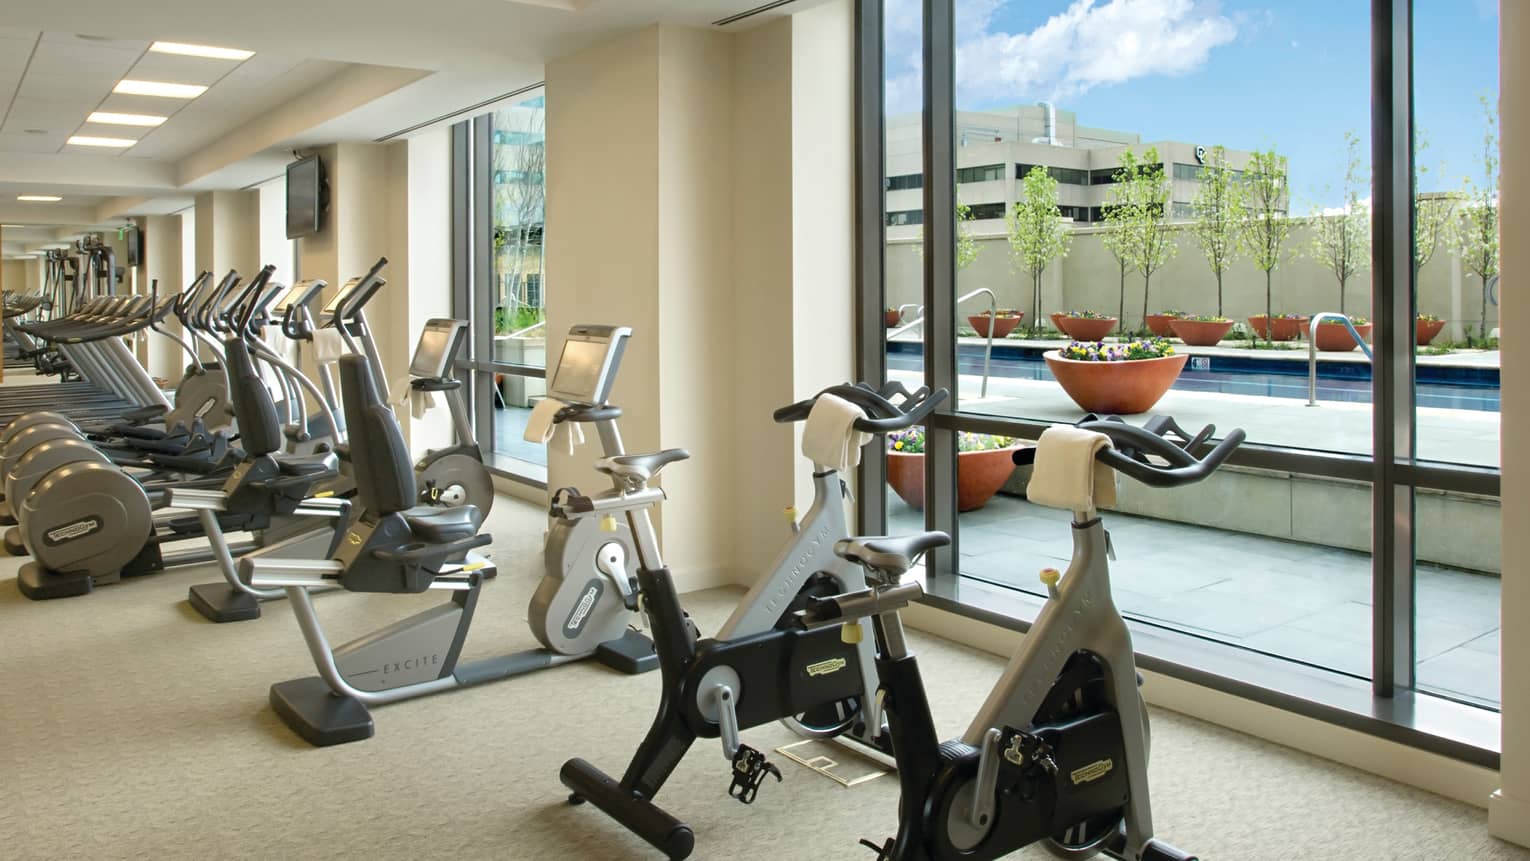 Fitness Centre cardio machines lined up against sunny floor-to-ceiling windows